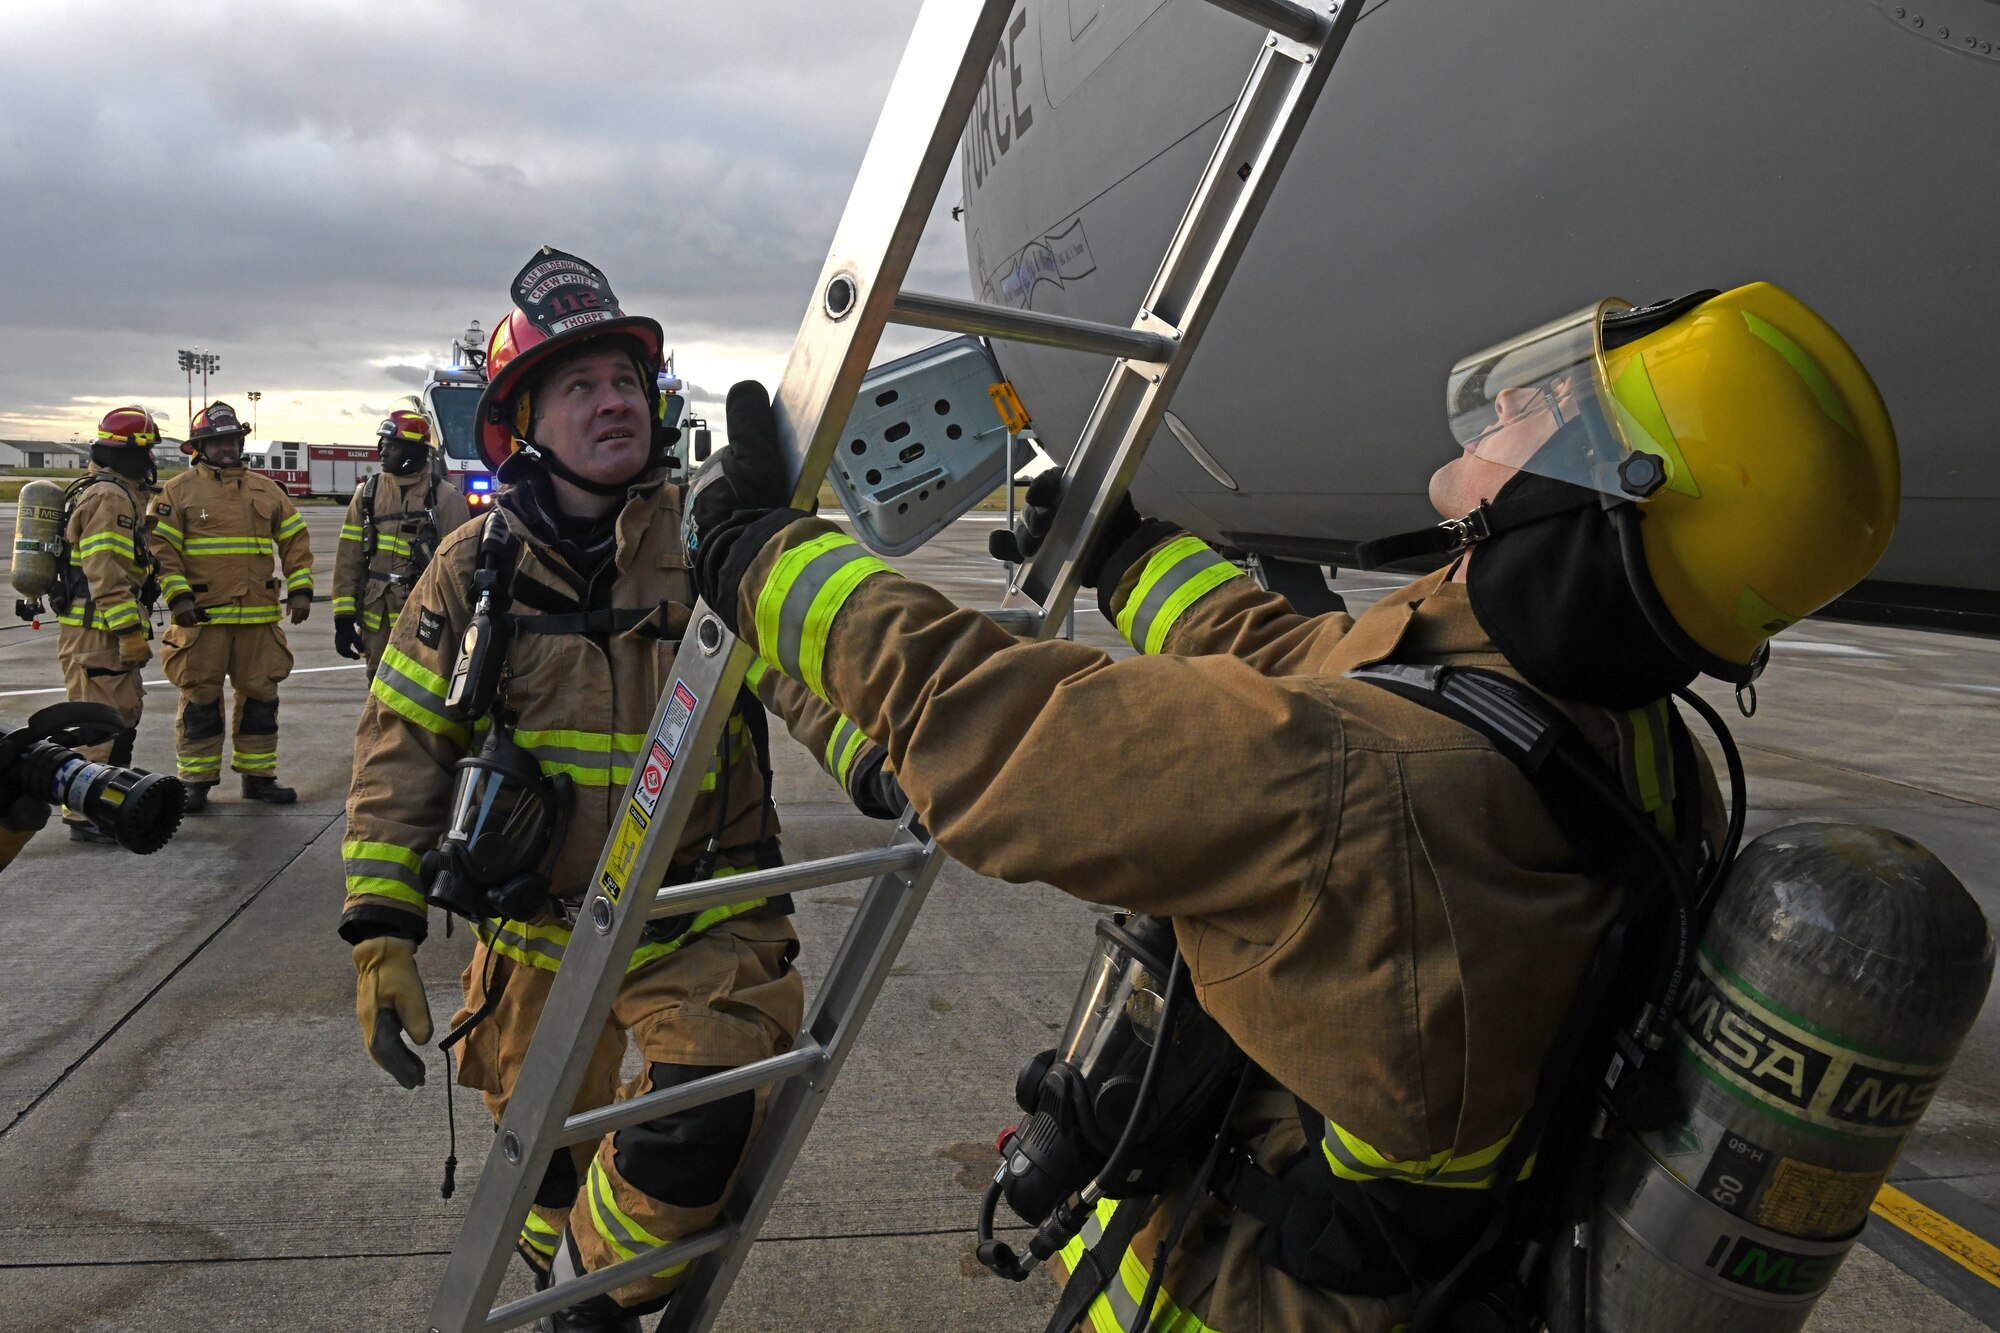 Firefighters assigned to the 100th Civil Engineer Squadron respond to a simulated aircraft mishap on a KC-135 Stratotanker aircraft at Royal Air Force Mildenhall, England, Nov. 4, 2021. The aircraft mishap was part of a readiness exercise that allowed emergency service personnel to practice how they would respond in a real life incident. (U.S. Air Force photo by Tech. Sgt. Anthony Hetlage)